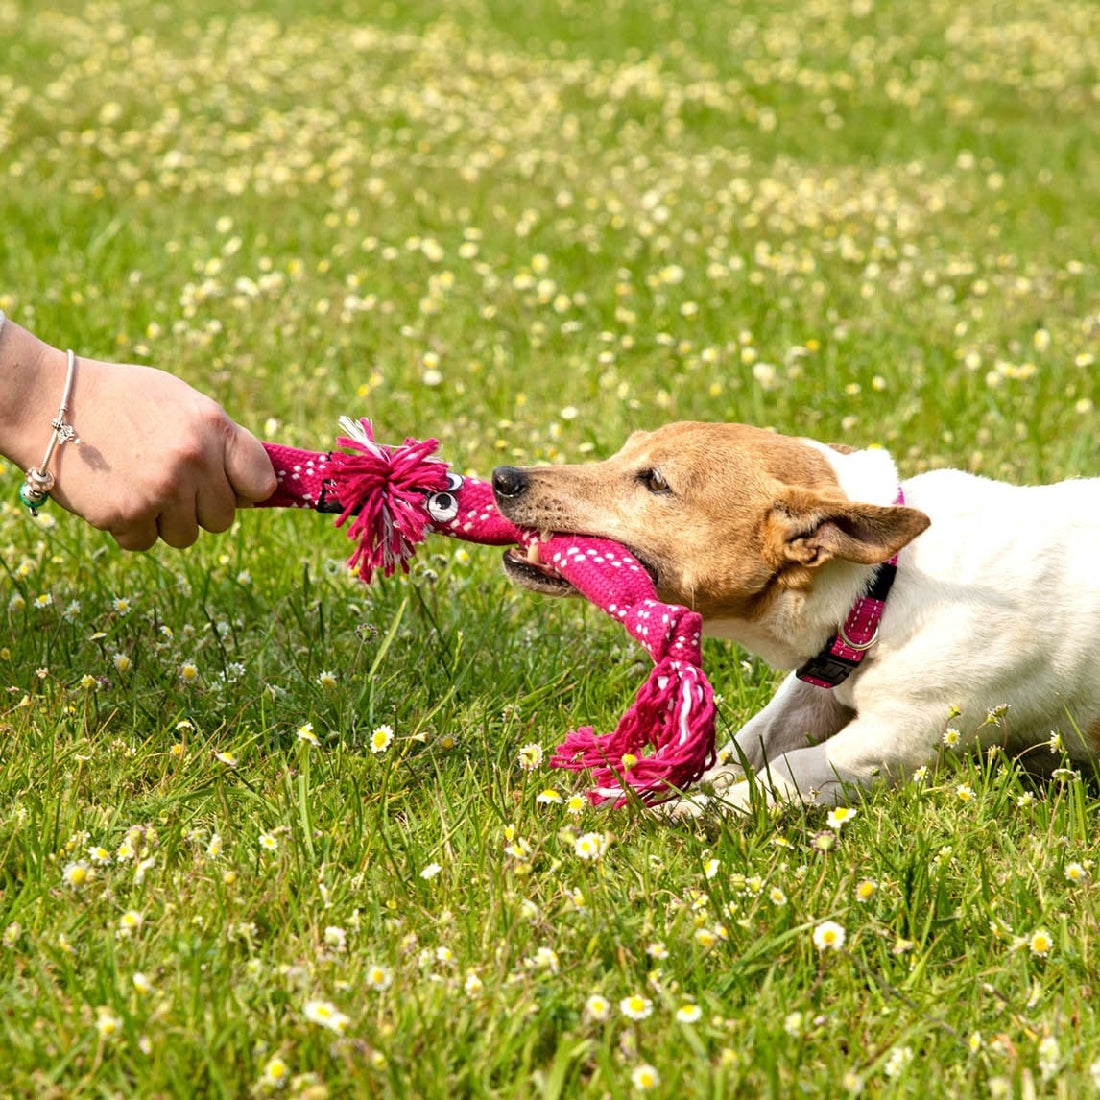 Dog playing tug of war with a Rogz toy in grass.